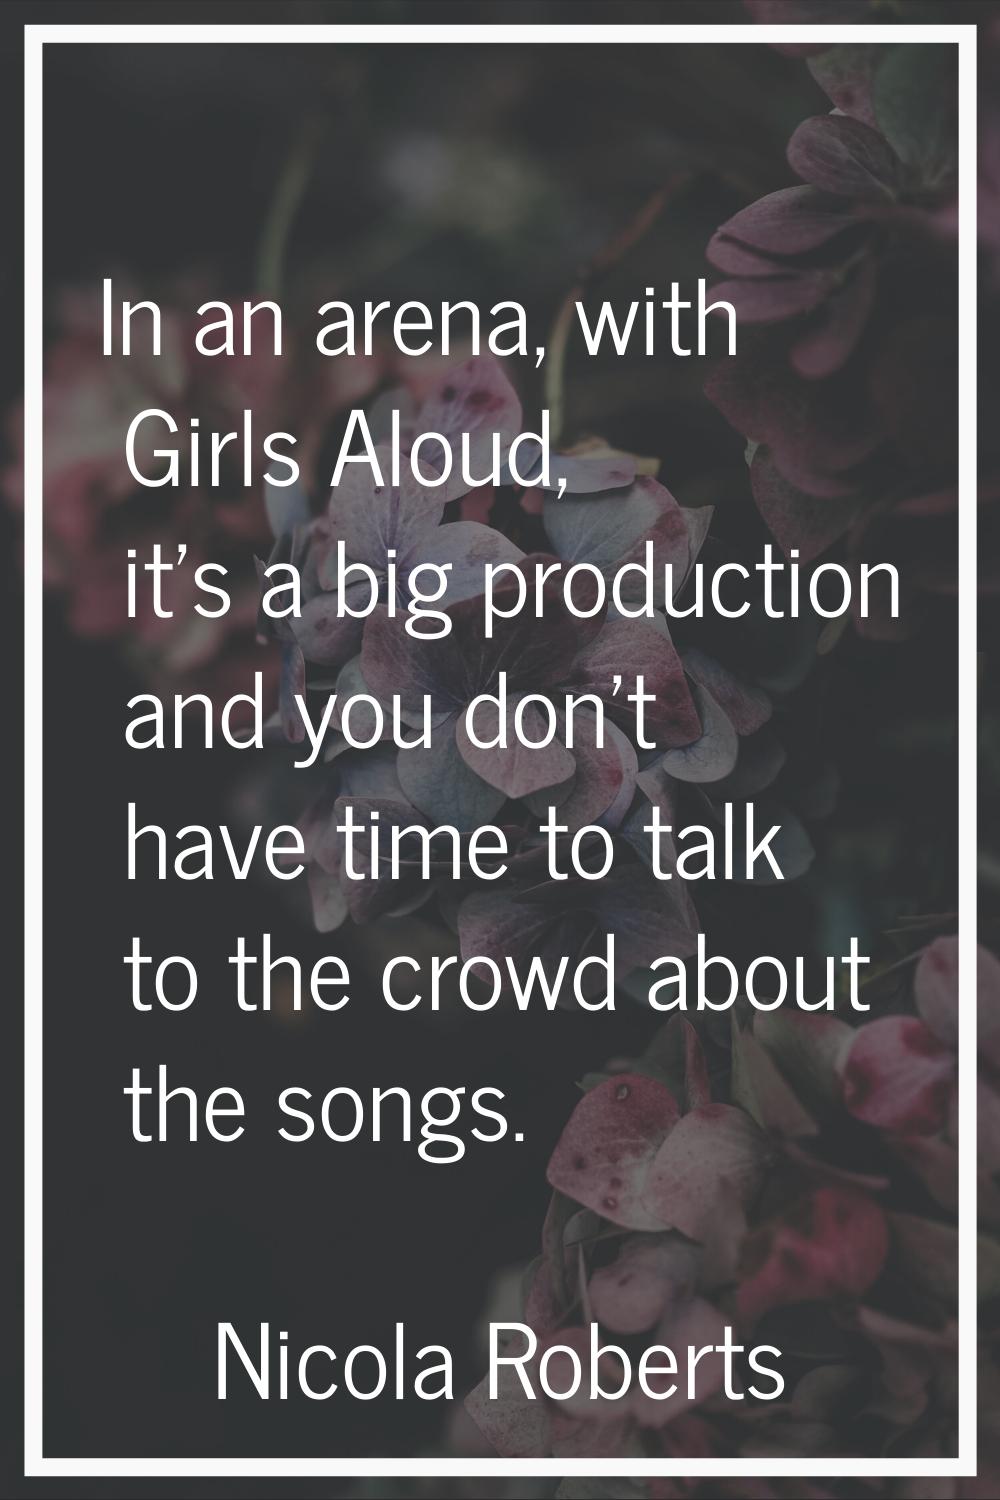 In an arena, with Girls Aloud, it's a big production and you don't have time to talk to the crowd a